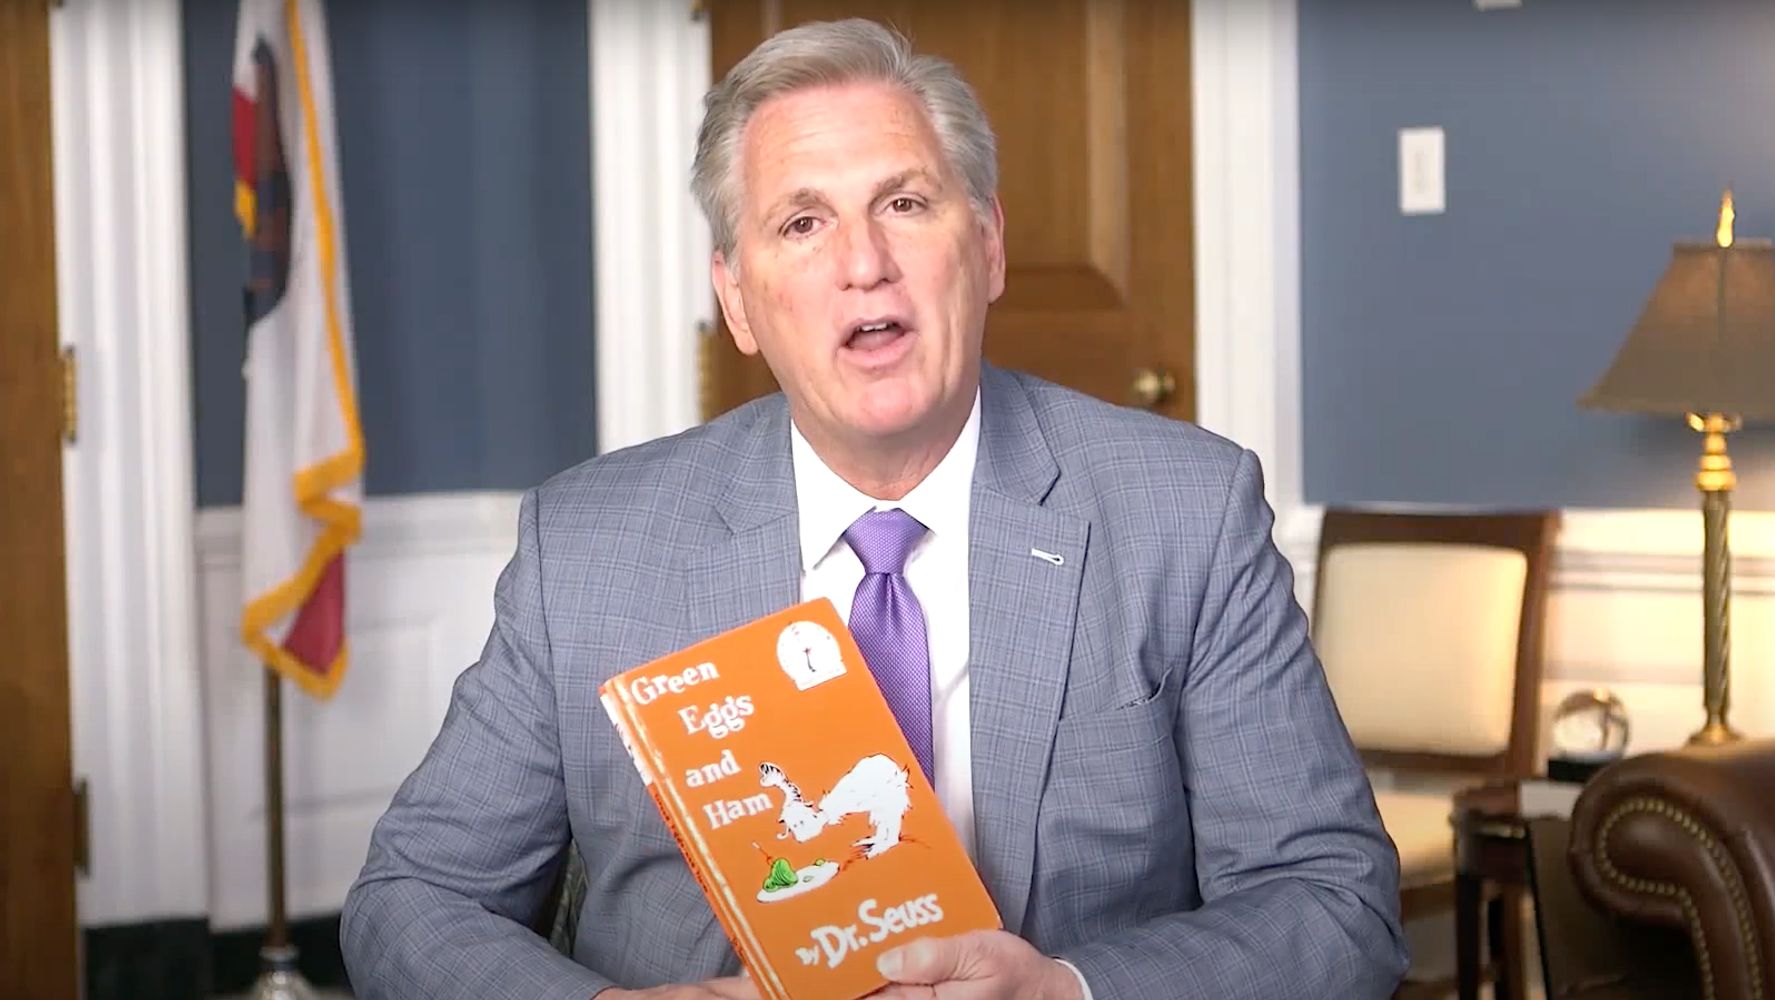 Dr Seuss Stunt by Kevin McCarthy makes people very, very surprised